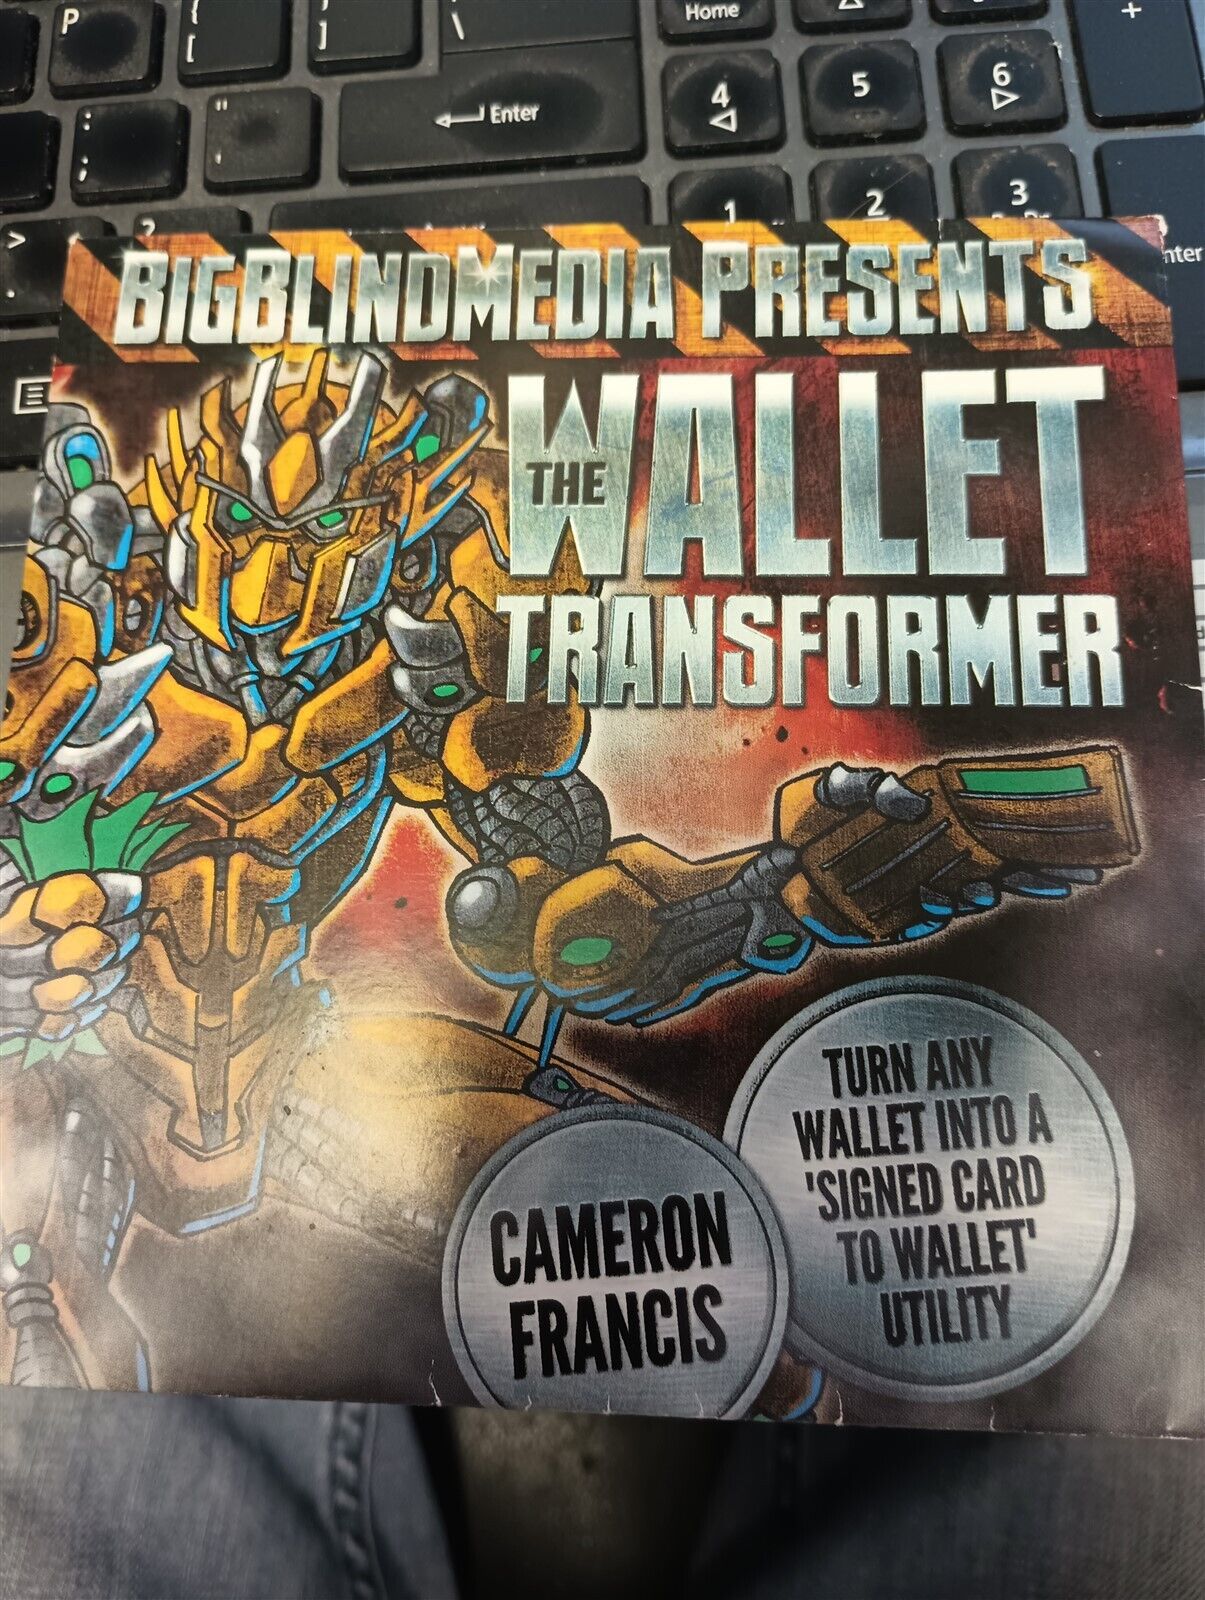 The Wallet Transformer by Cameron Francis and Big Blind Media Card to Wallet